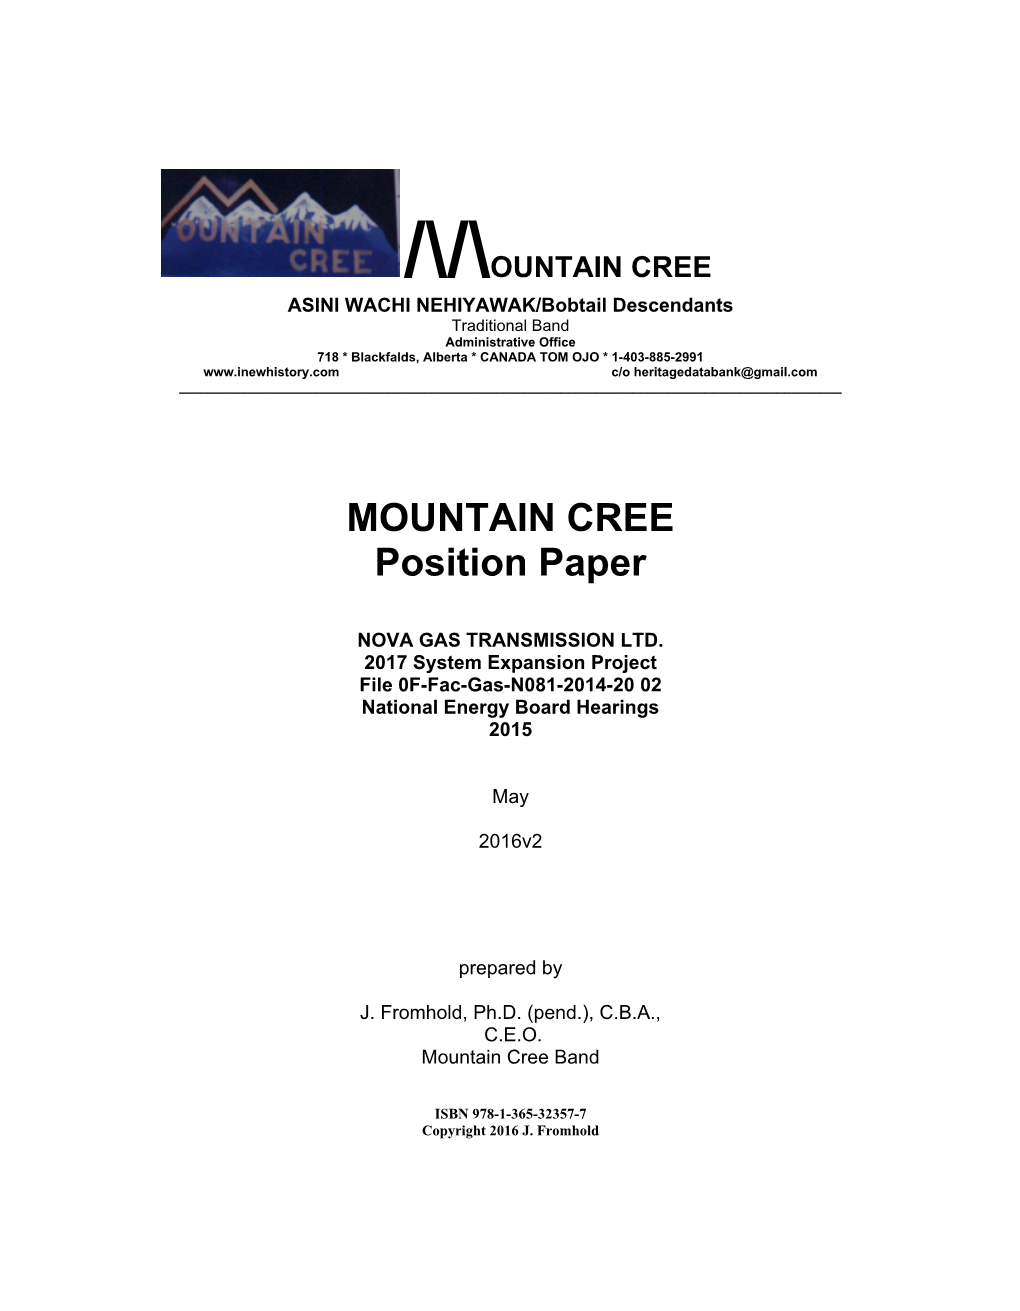 MOUNTAIN CREE Position Paper